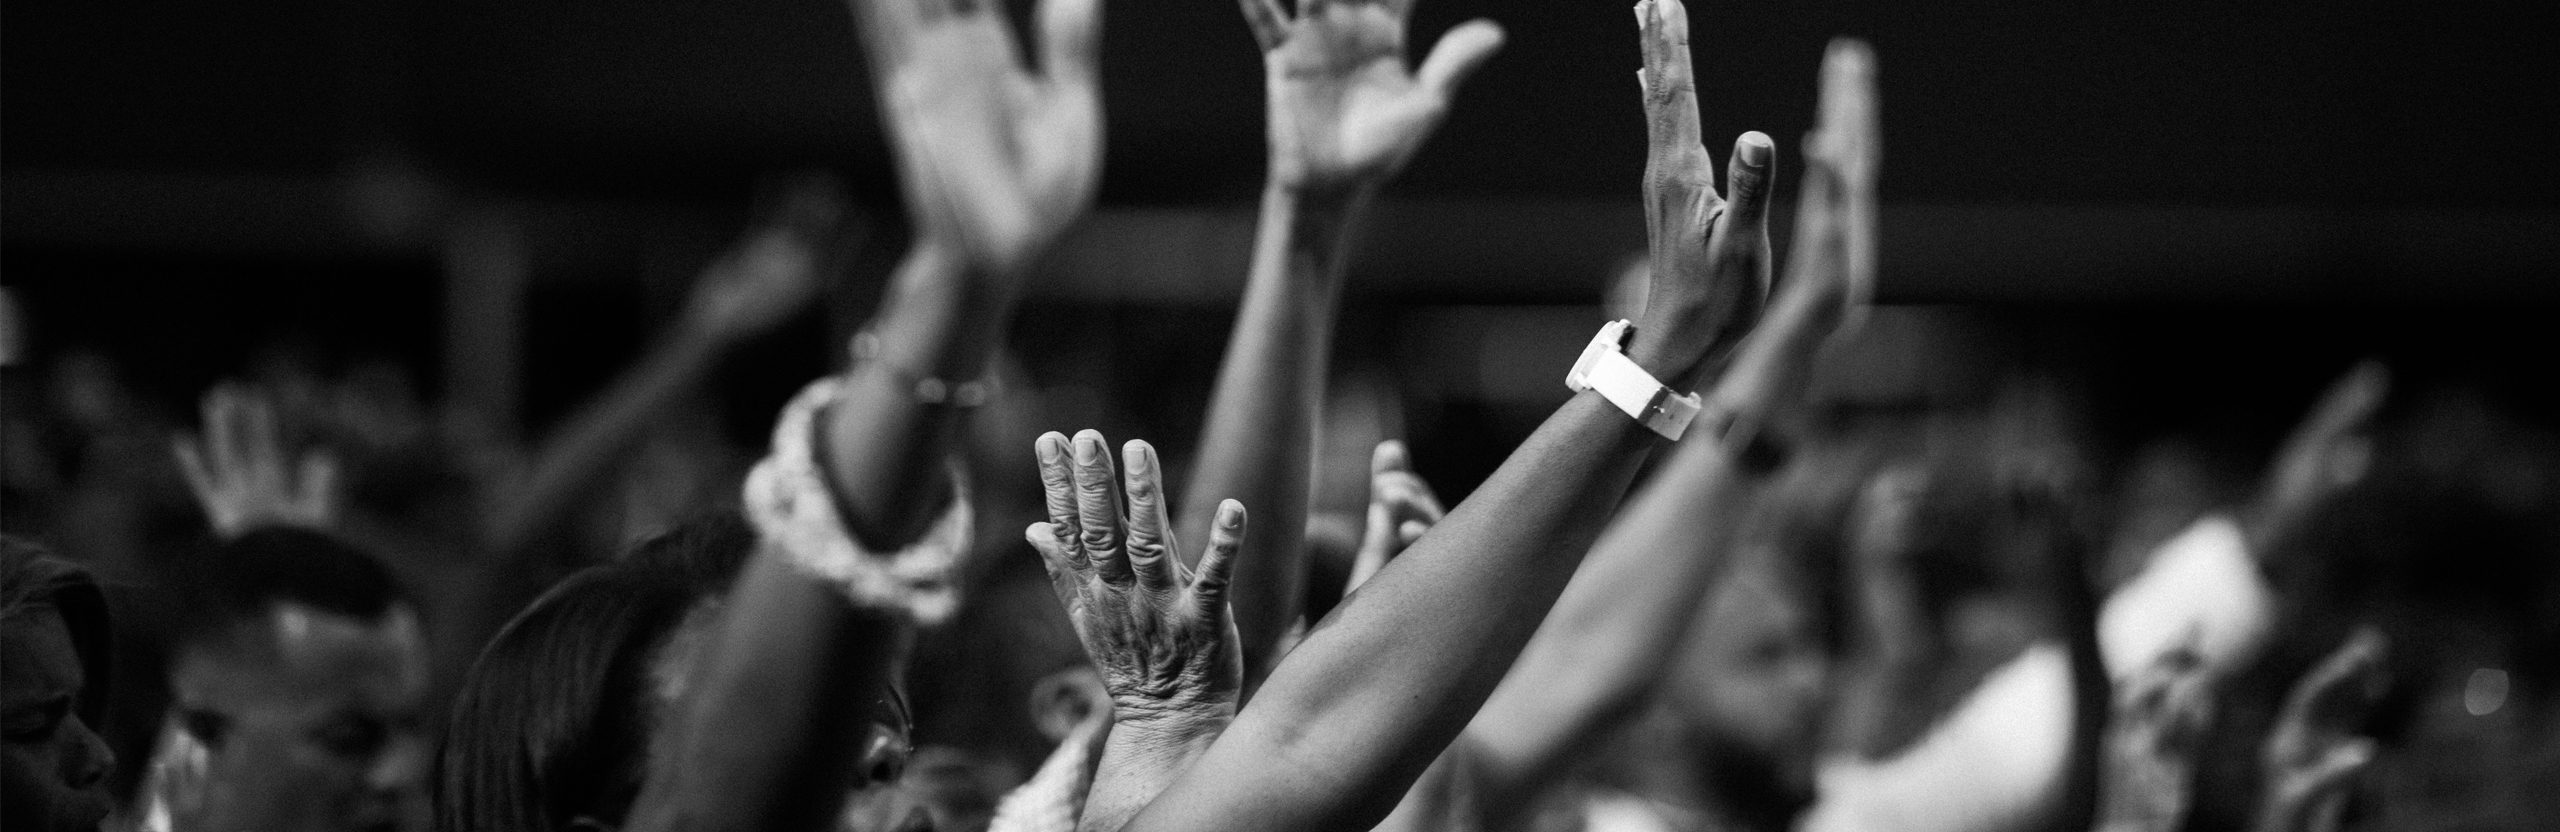 An image of people’s hands raised. 